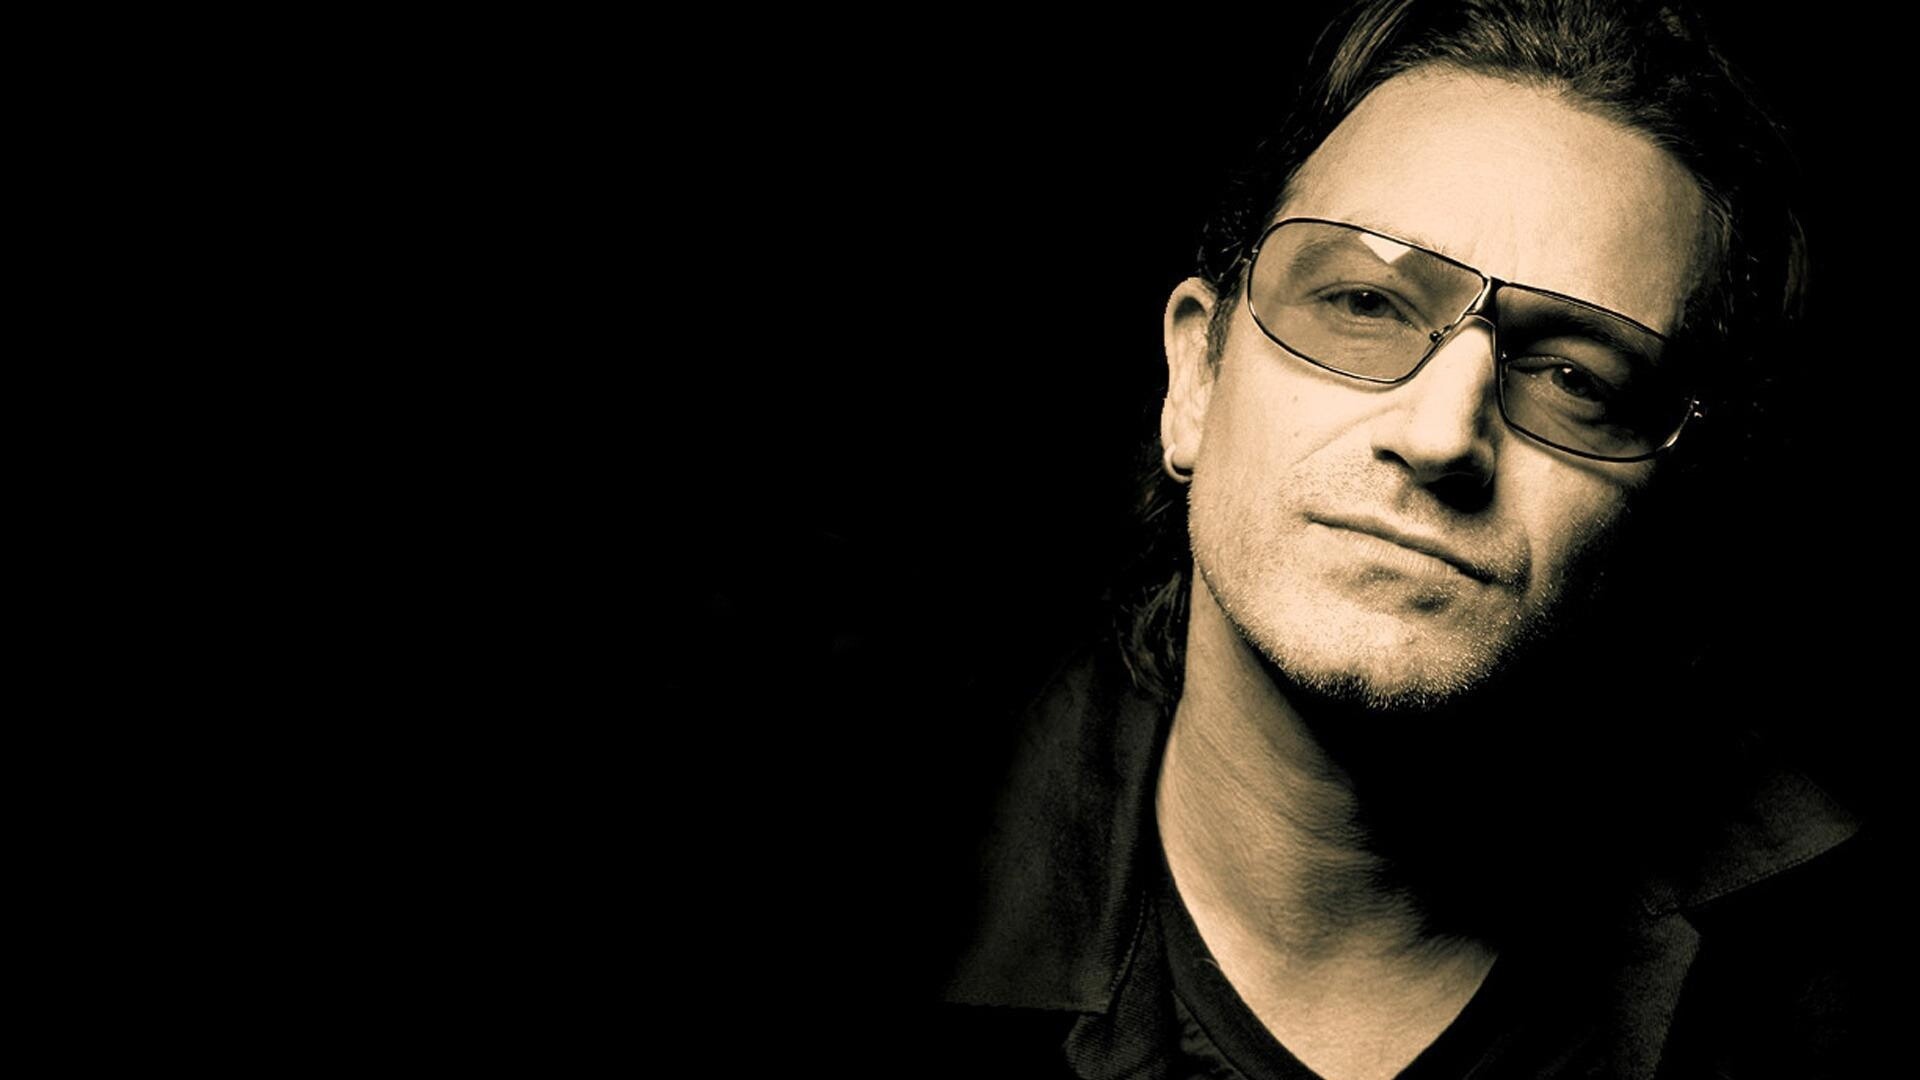 U2: Bono, The band was inducted into the Rock and Roll Hall of Fame in 2005. 1920x1080 Full HD Wallpaper.